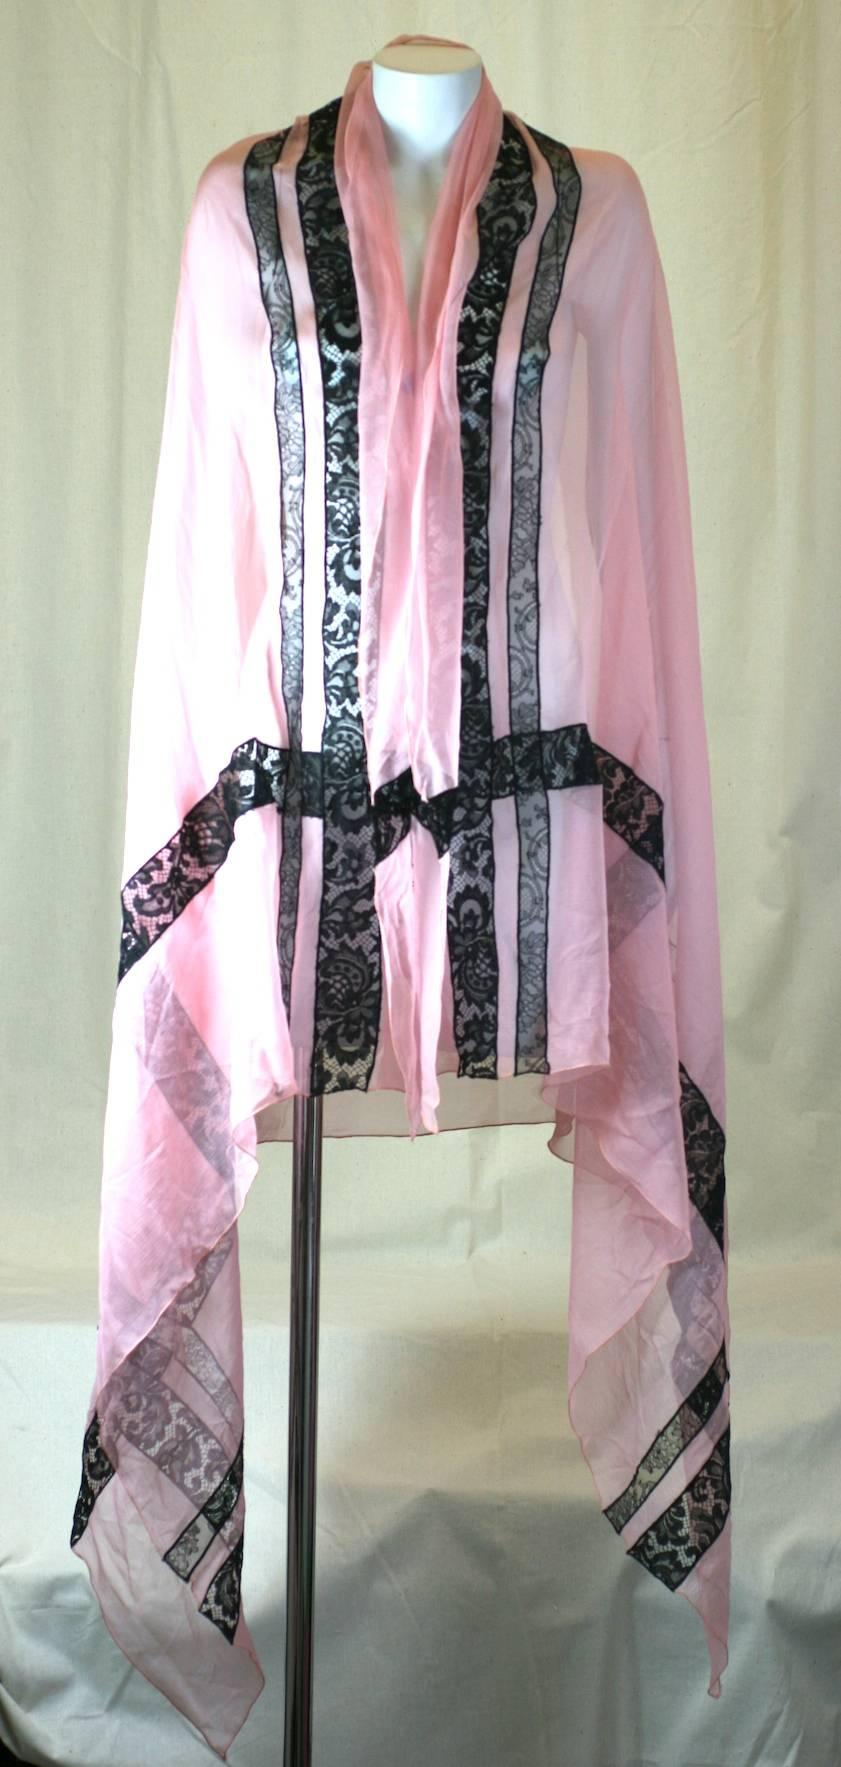 Givenchy Haute Couture Silk Chiffon and Lace Stole. Pink silk chiffon is inserted with strips of black lace in this large elegant wrap. 
1980's France. Unlabeled. Ex Collection NY Philanthropist Carroll Petrie. 
78